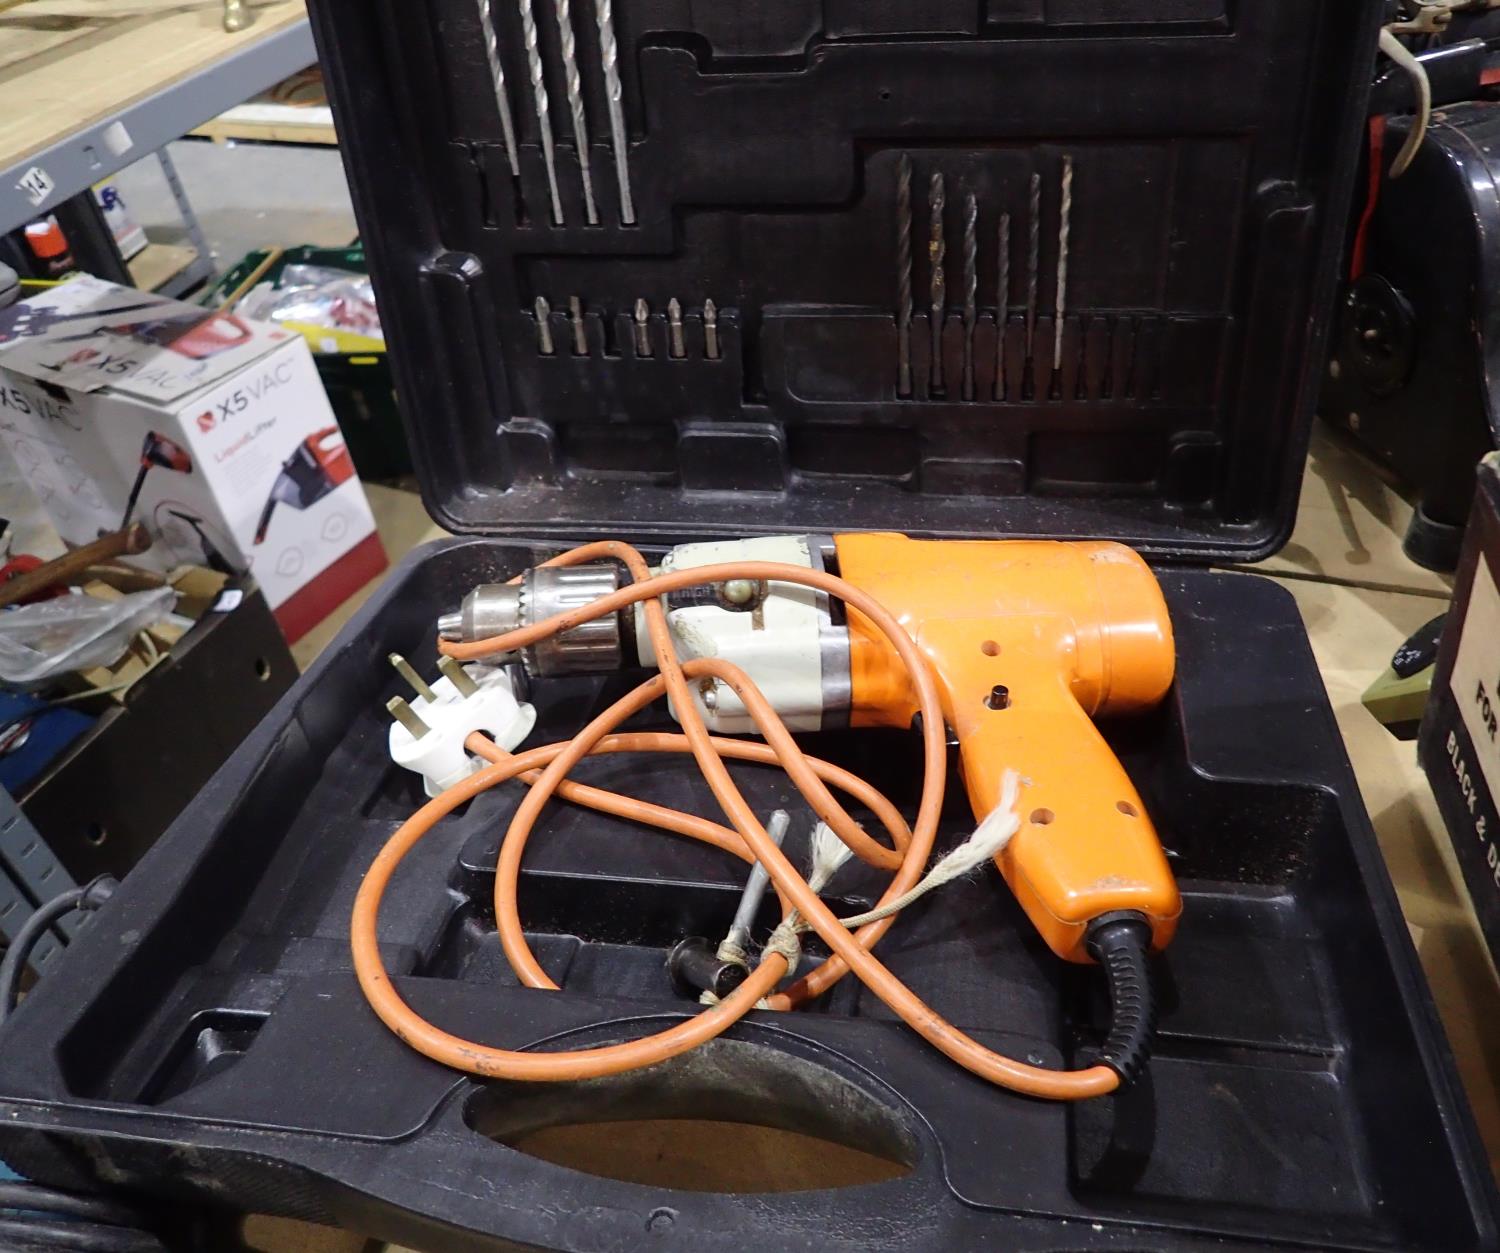 Power base corded drill including hard case with drill bits. All electrical items in this lot have